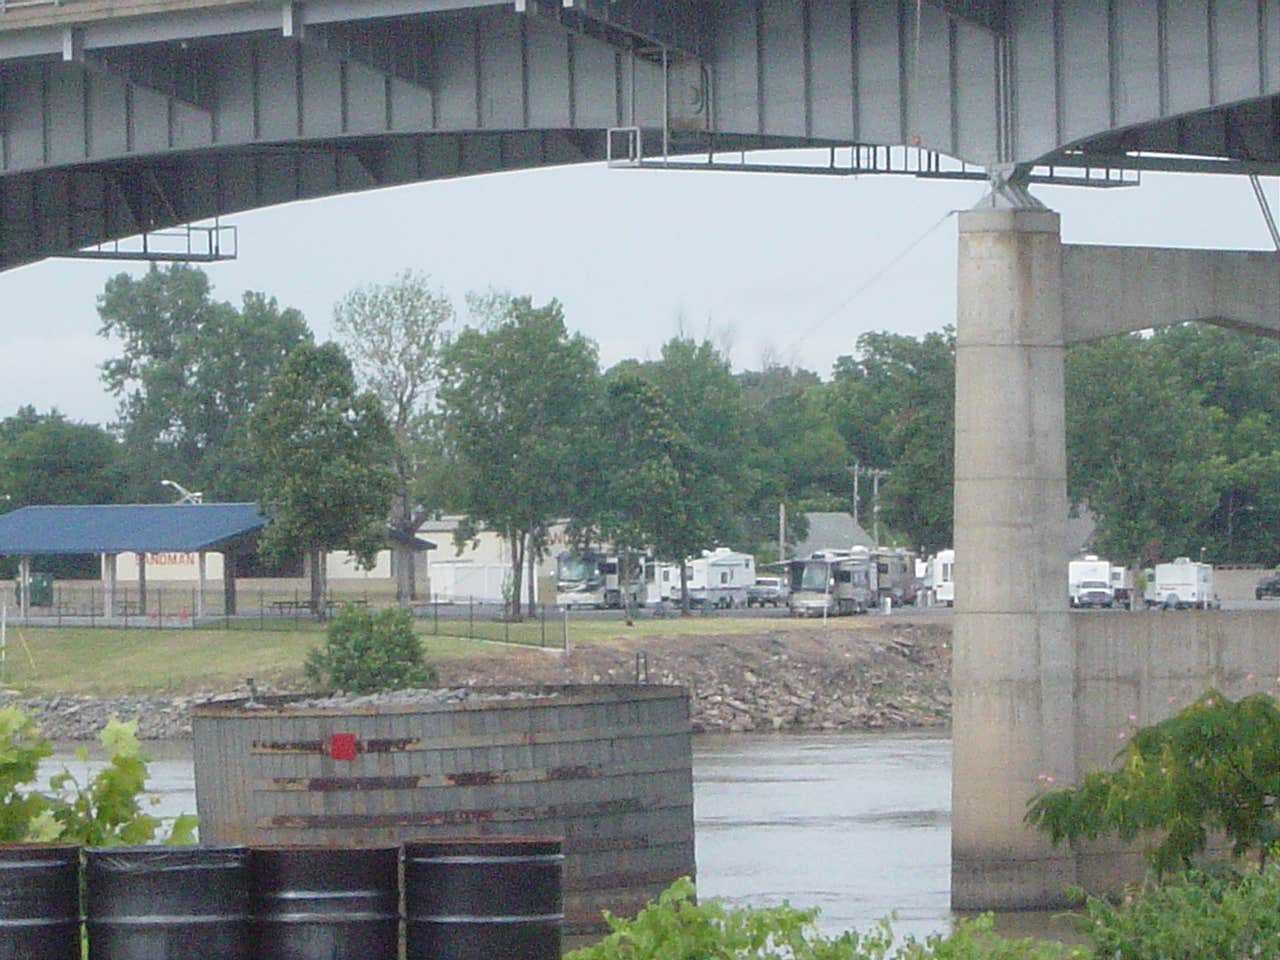 View of the RV park from downtown Little Rock